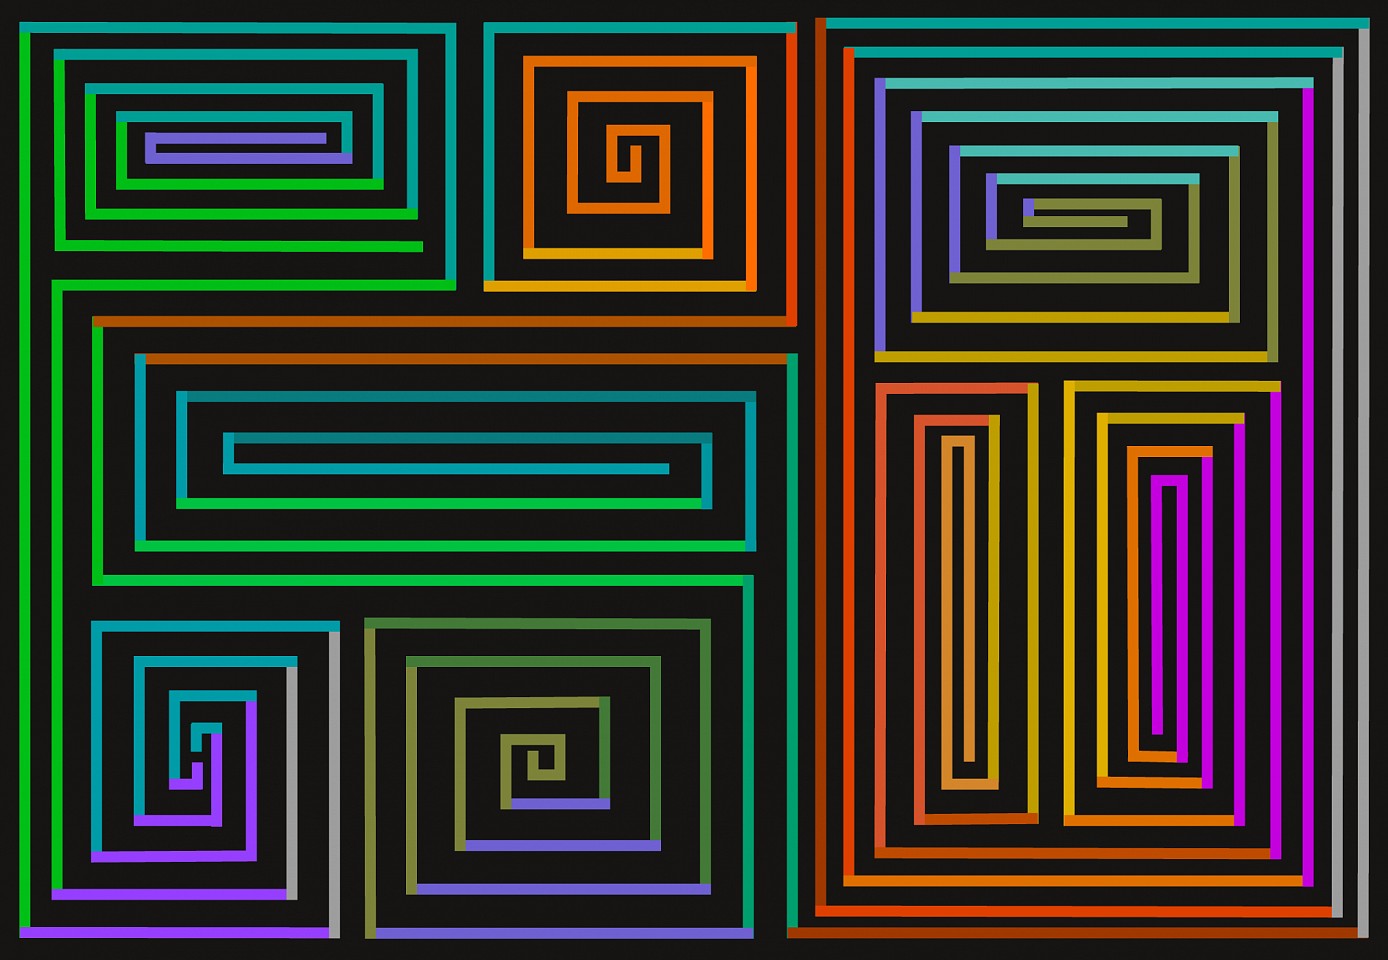 Dane Albert, Color Sticks #8 Night, 2023
Acrylic on canvas (Concept), 48 x 72 in. (121.9 x 182.9 cm)
Series of colored lines and shapes in multiple configurations
DA.2023.sticks-008-night